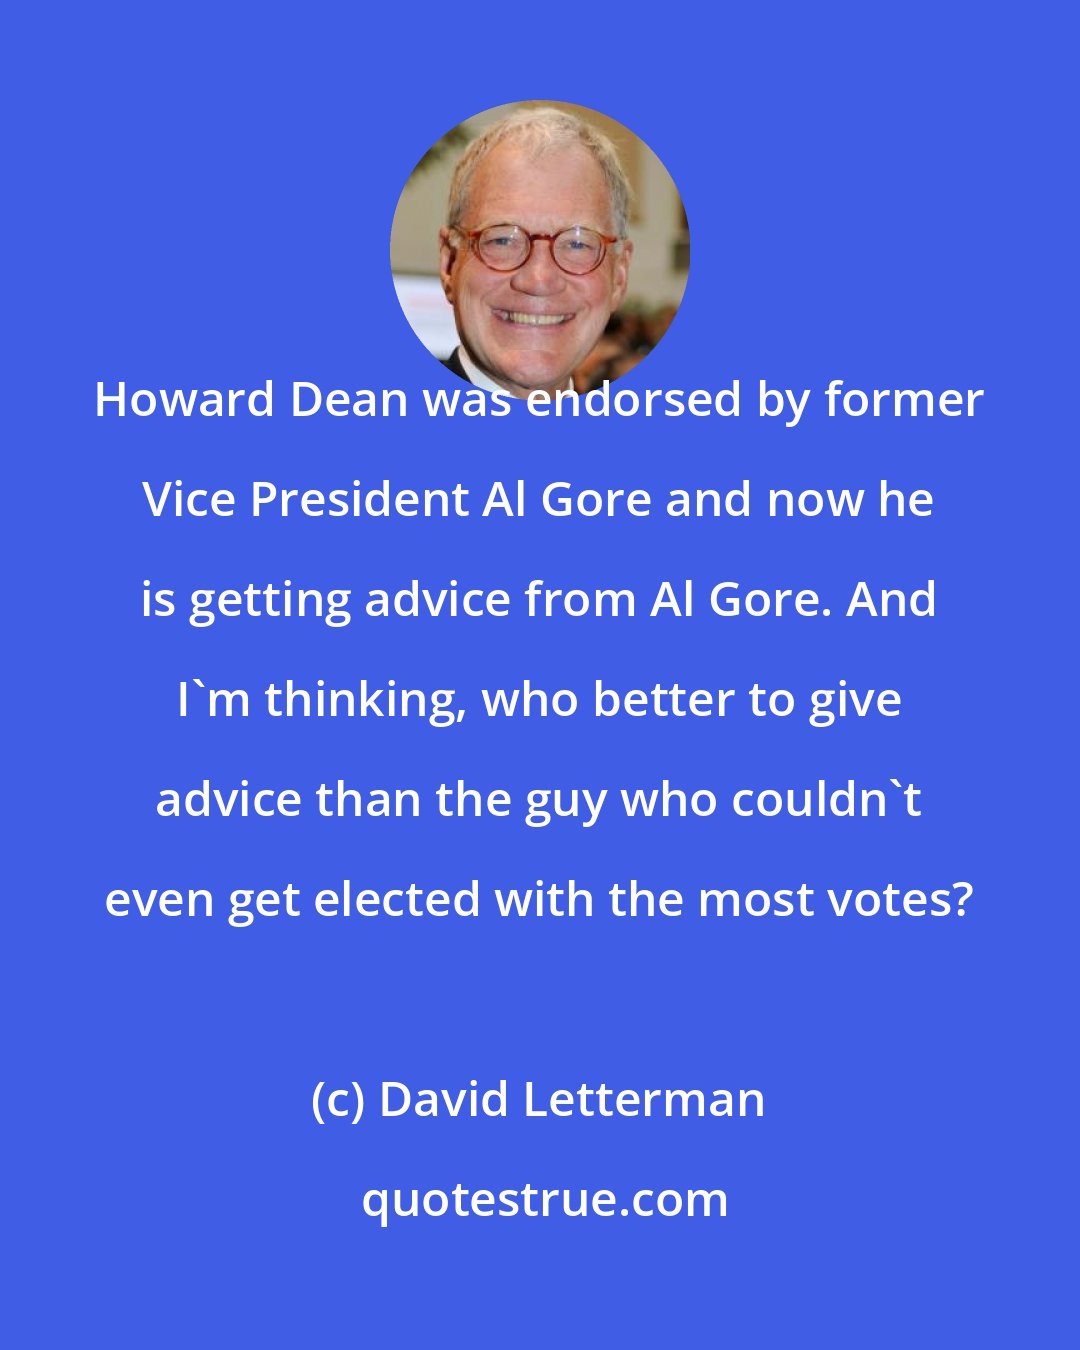 David Letterman: Howard Dean was endorsed by former Vice President Al Gore and now he is getting advice from Al Gore. And I'm thinking, who better to give advice than the guy who couldn't even get elected with the most votes?